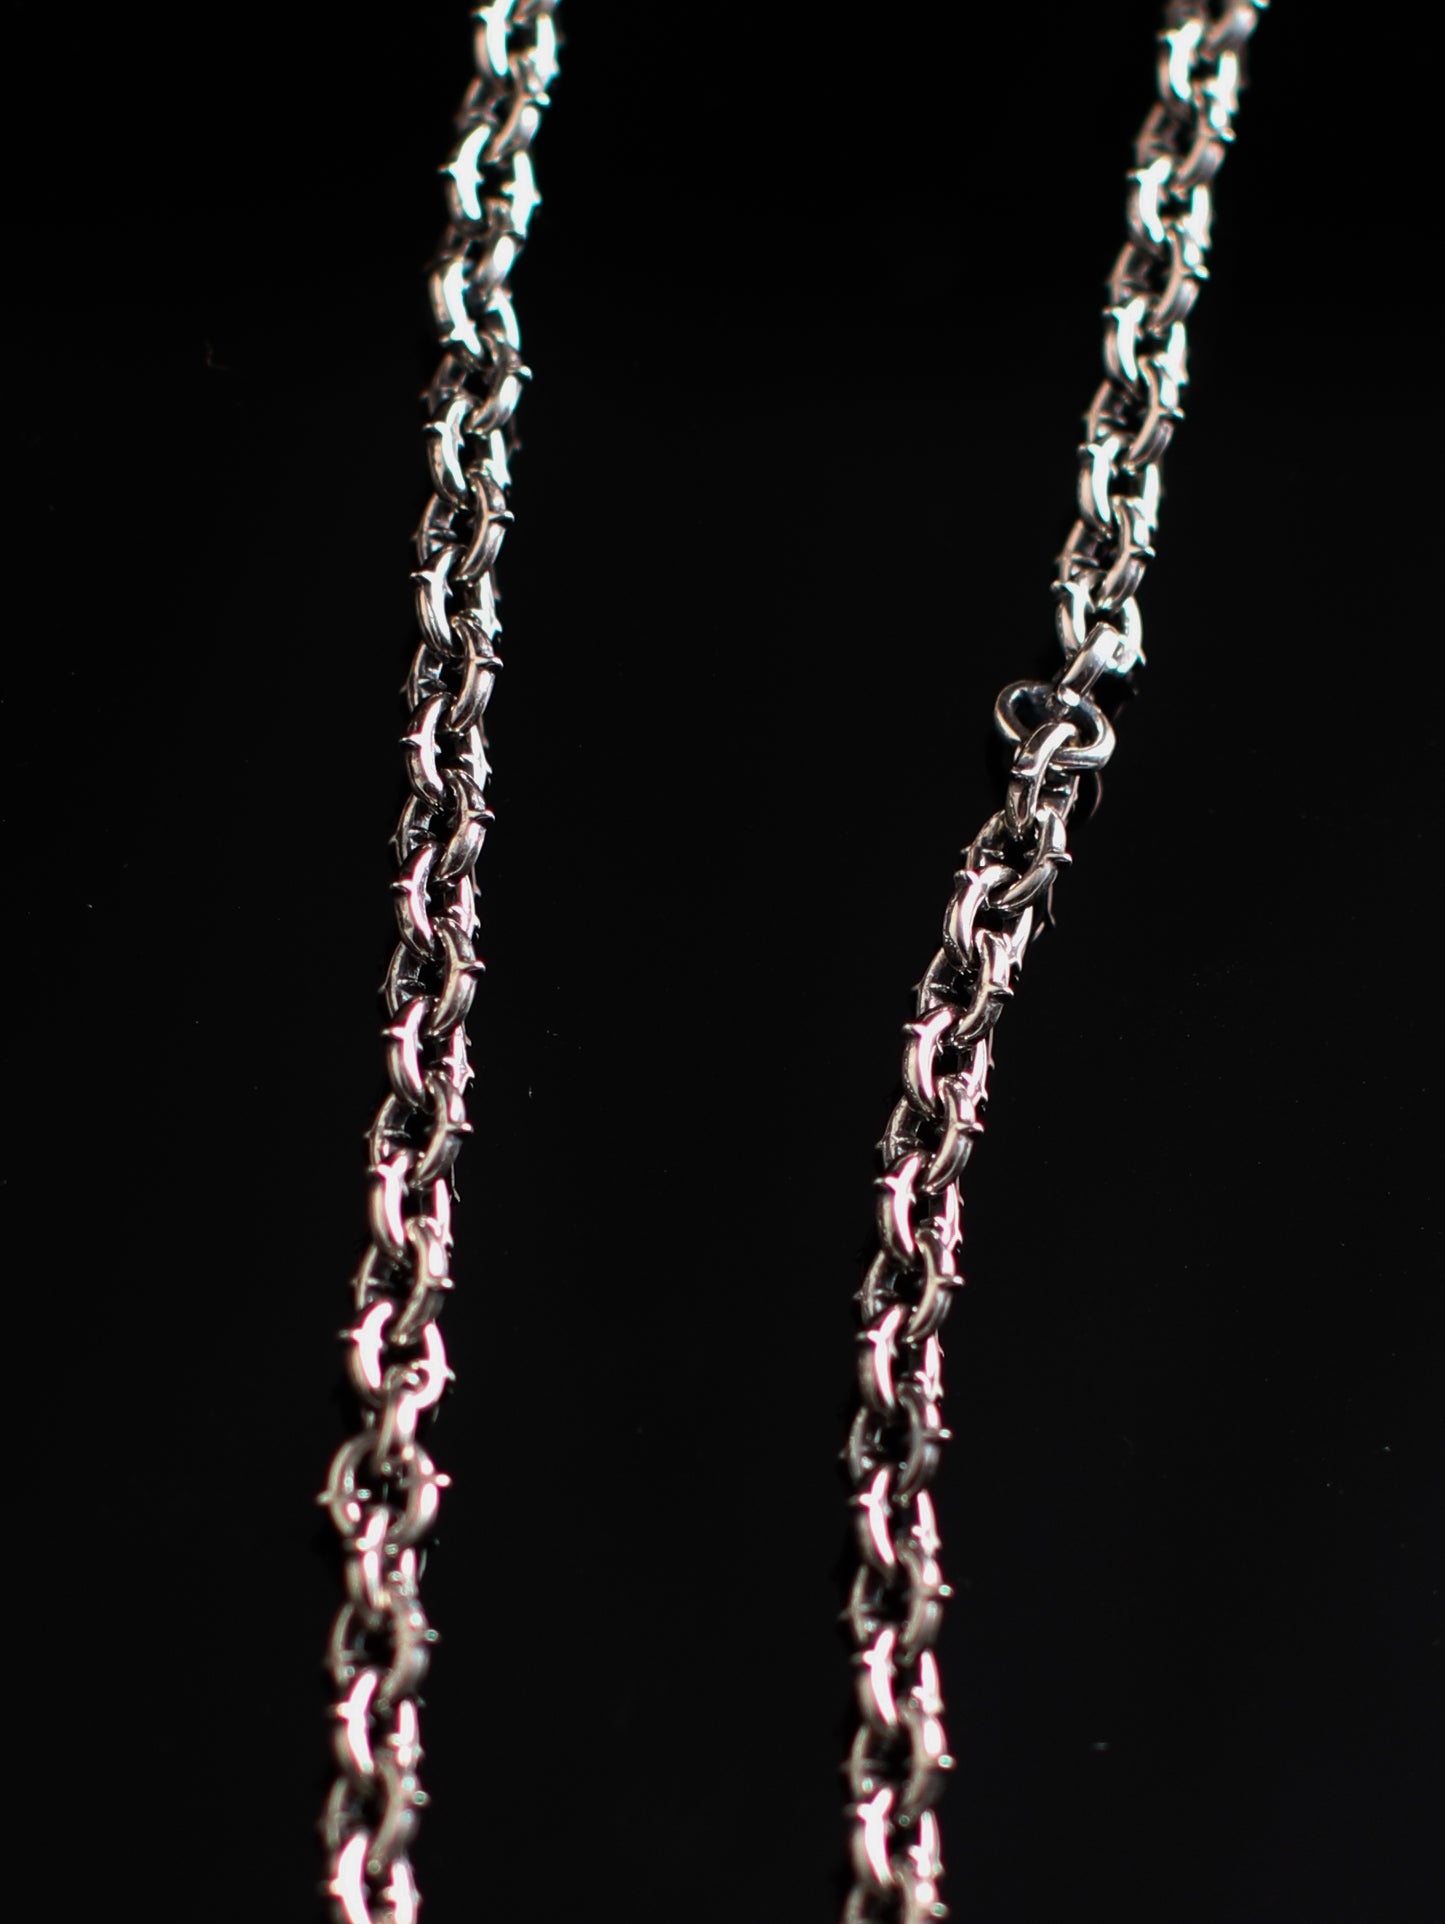 UNHOLY Barbed spiked chain